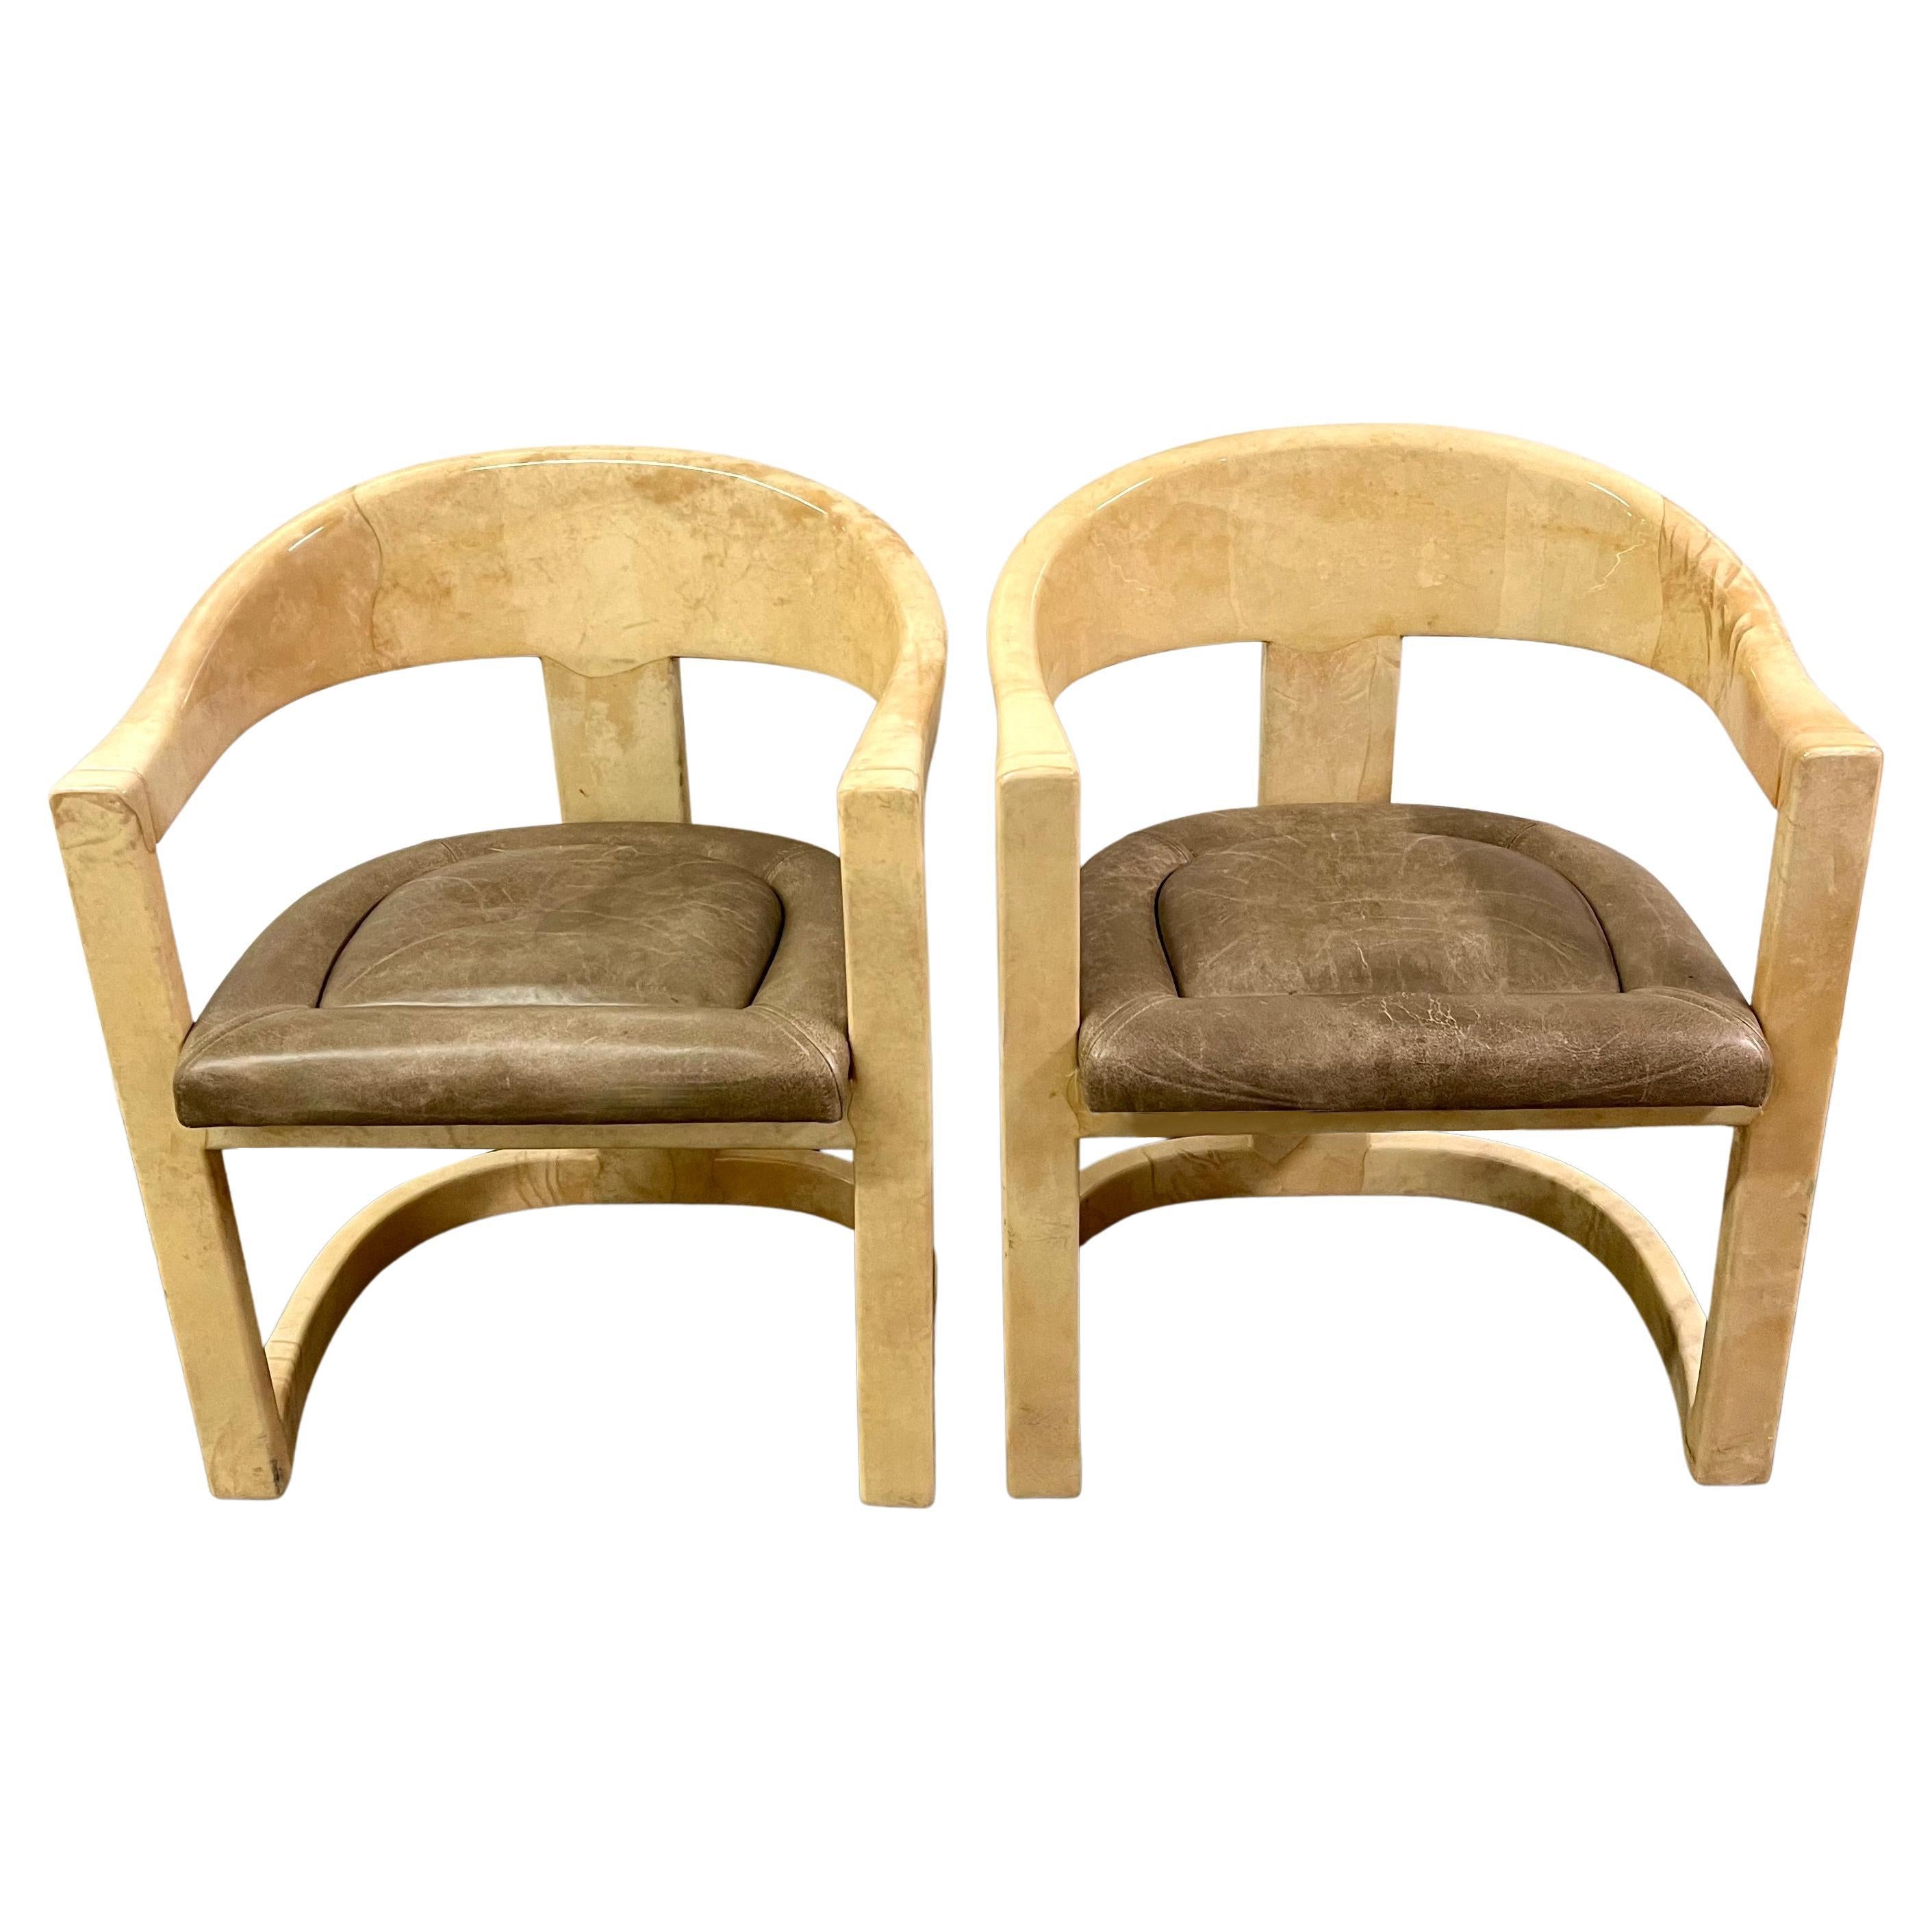 Pair of Karl Springer Goatskin Onassis Chairs with Leather Upholstered Seats For Sale